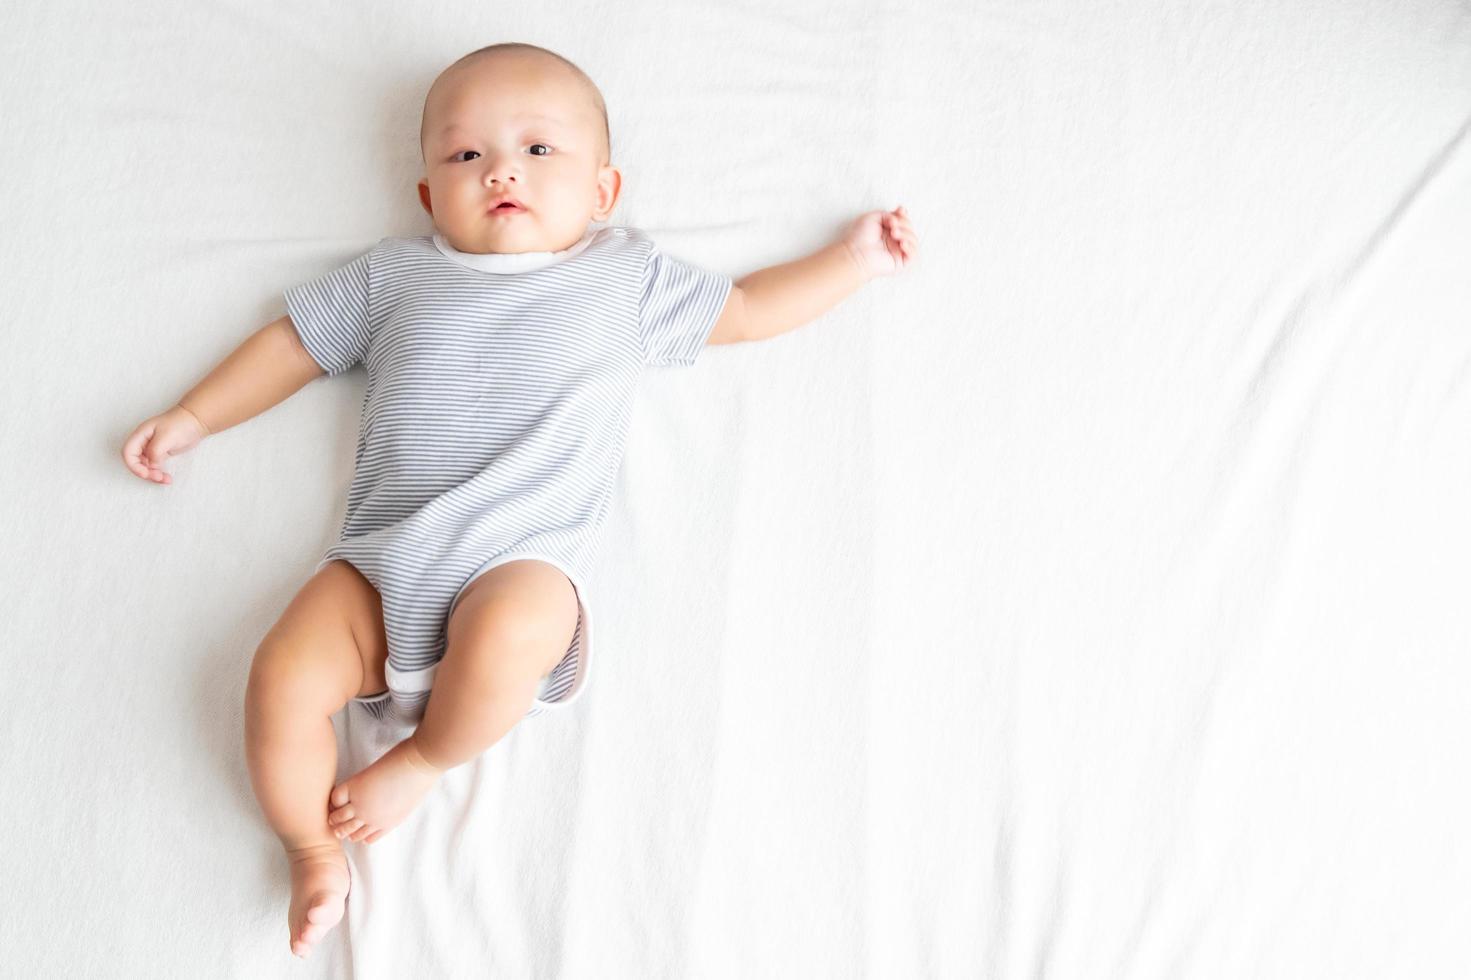 Top view and side area baby wearing a striped shirt, spreading arms and legs on a white carpet. photo